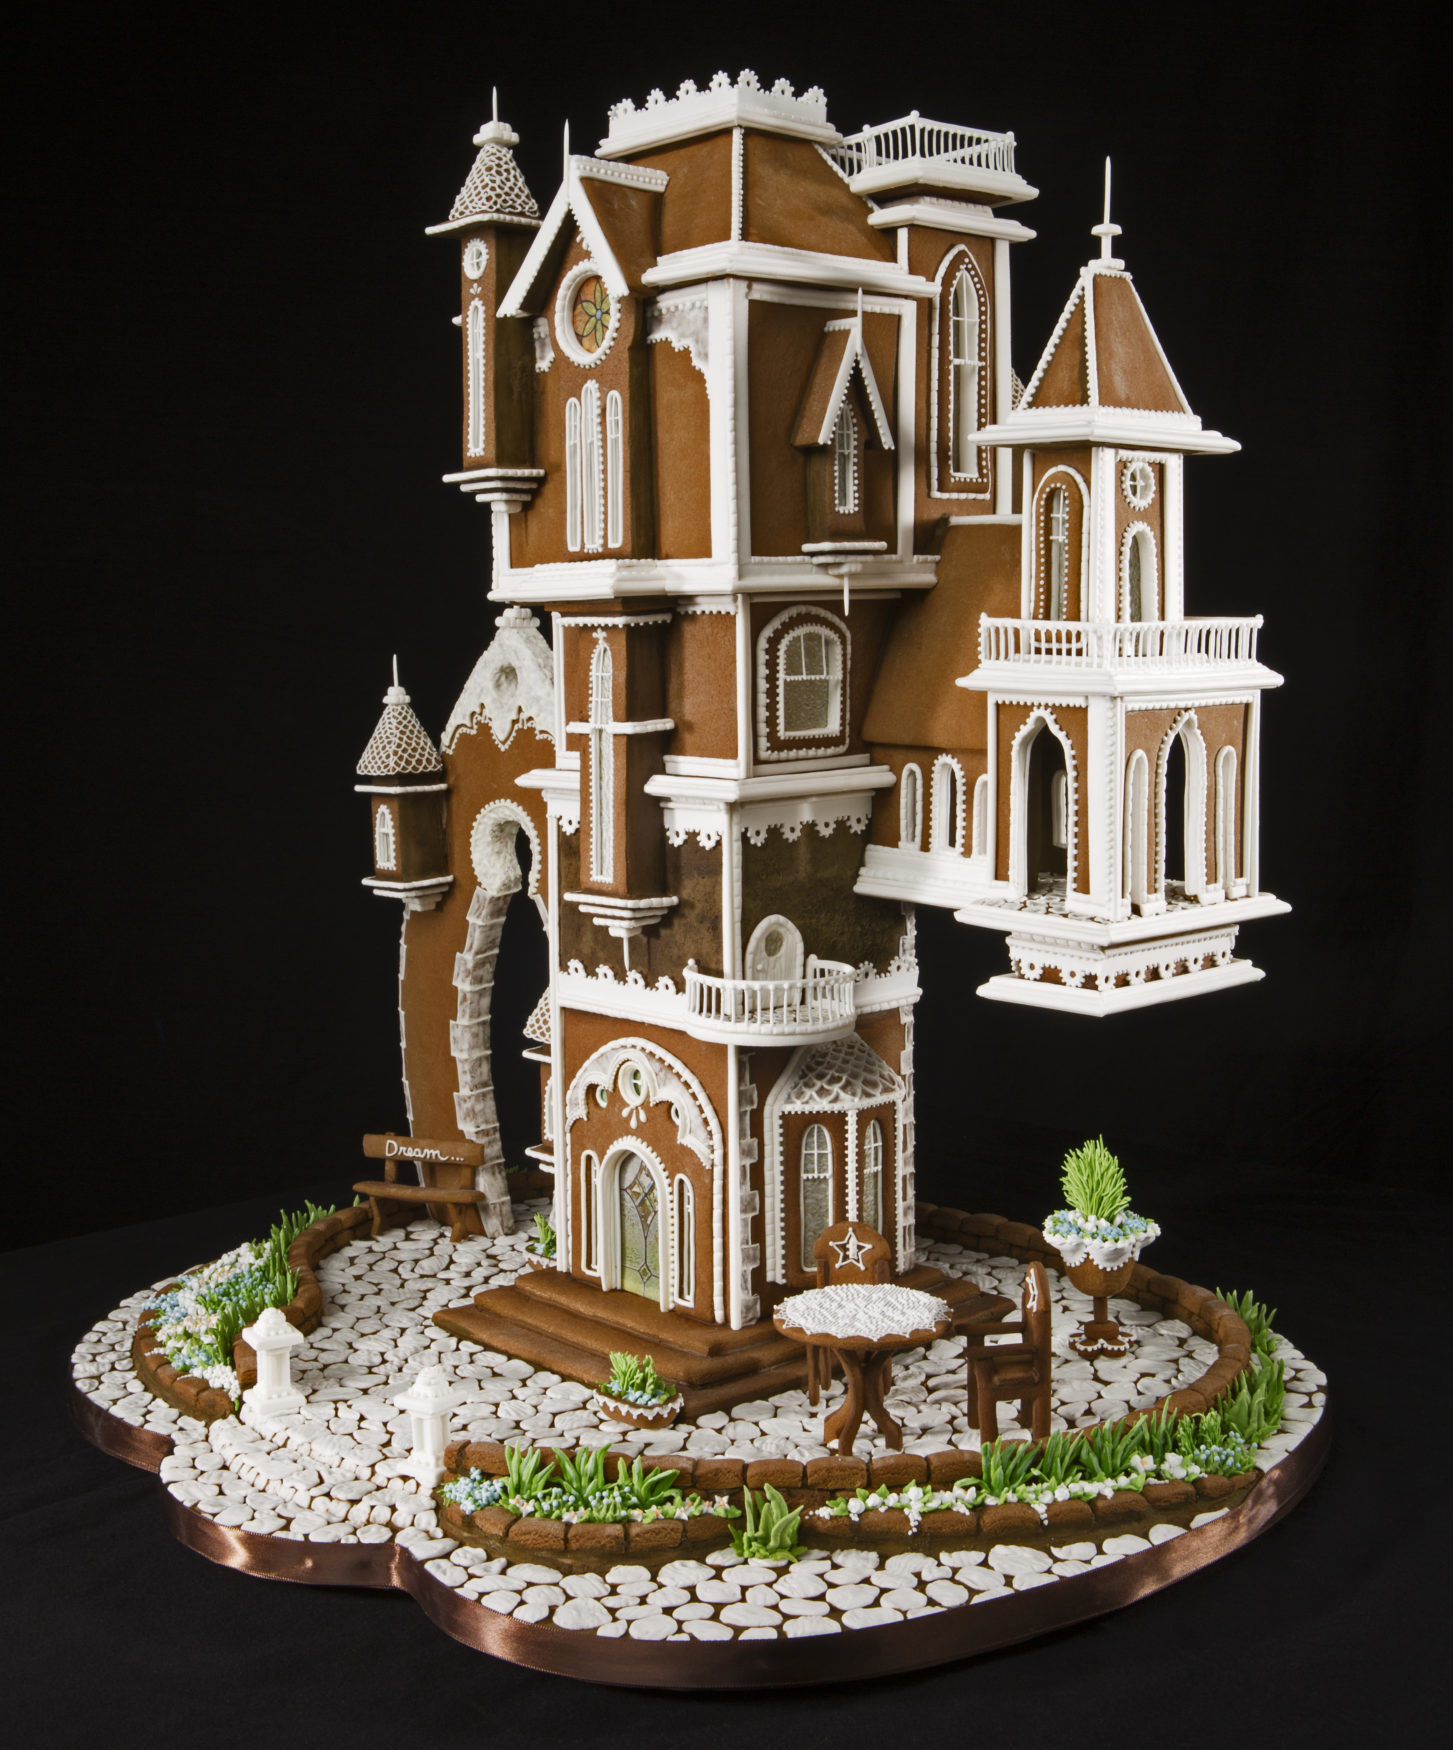 ornate, multi-level gingerbread townhouse with a wrap about patio